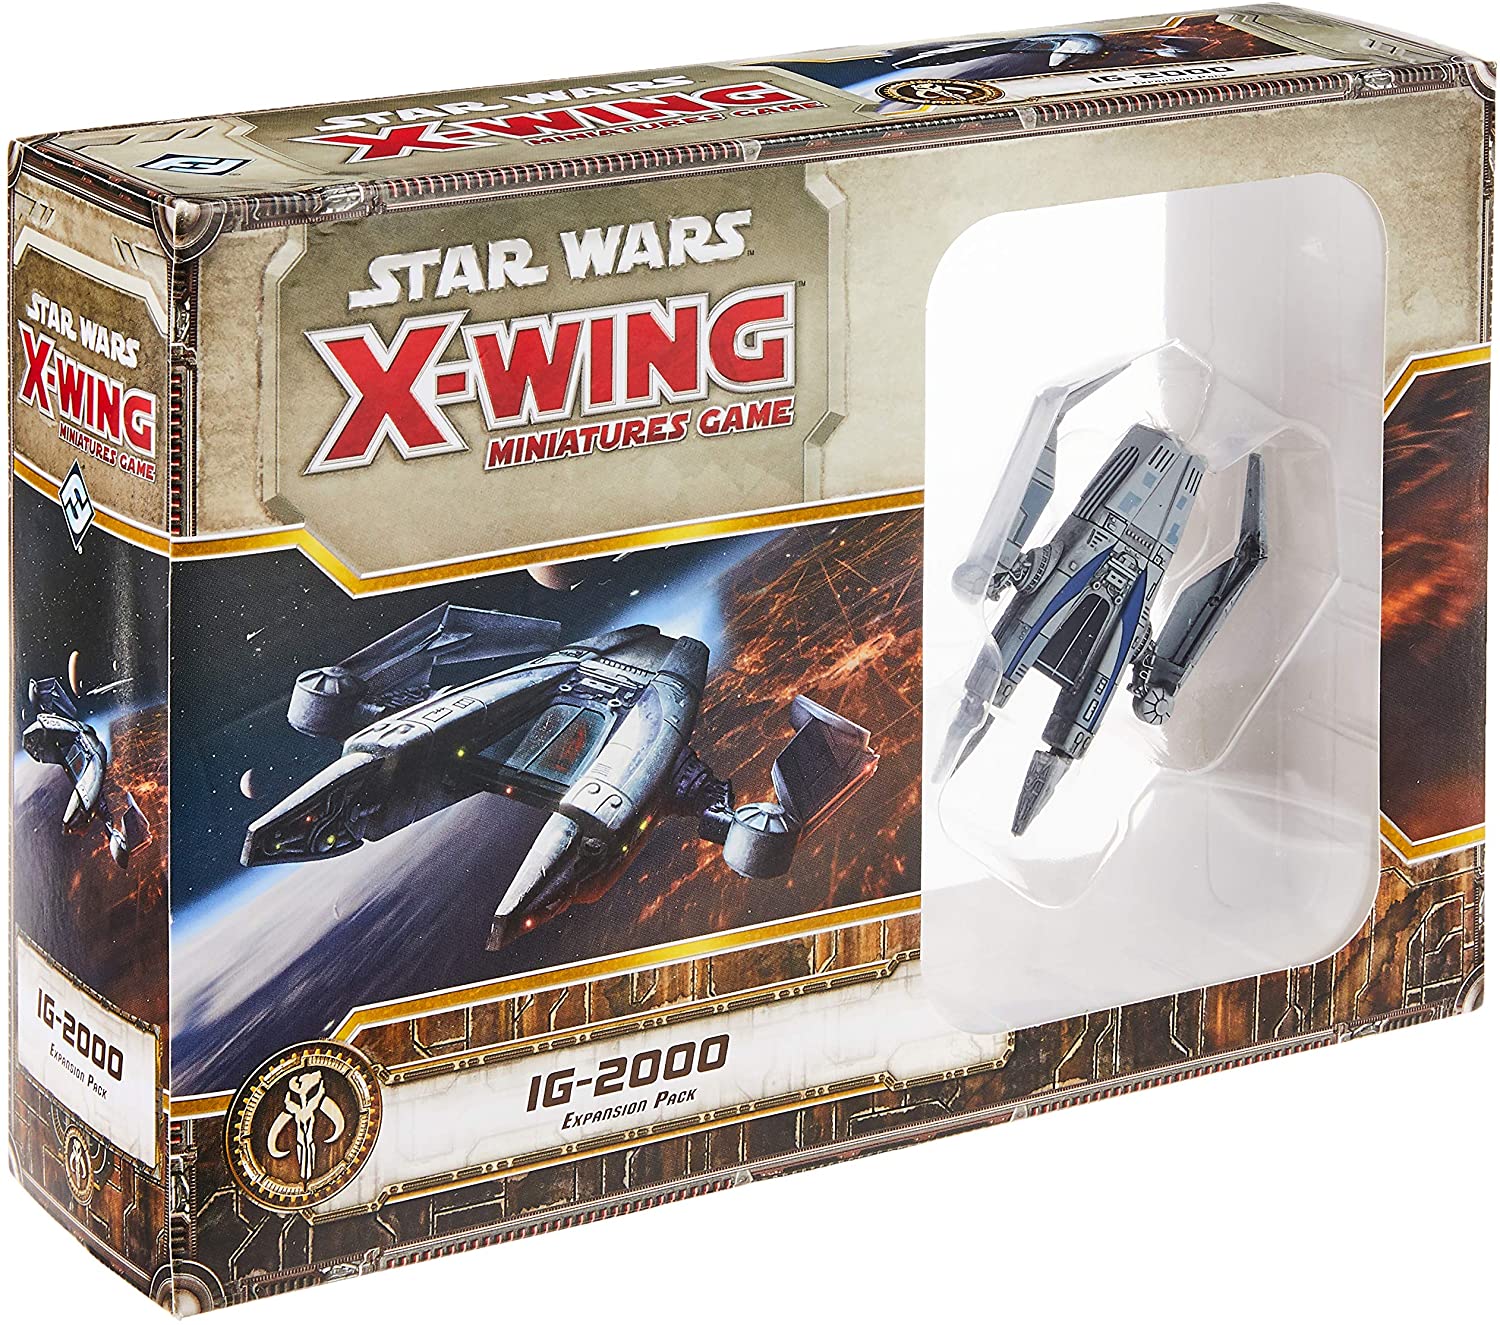 Star Wars X-Wing Miniatures Game Expansion: Ig-2000